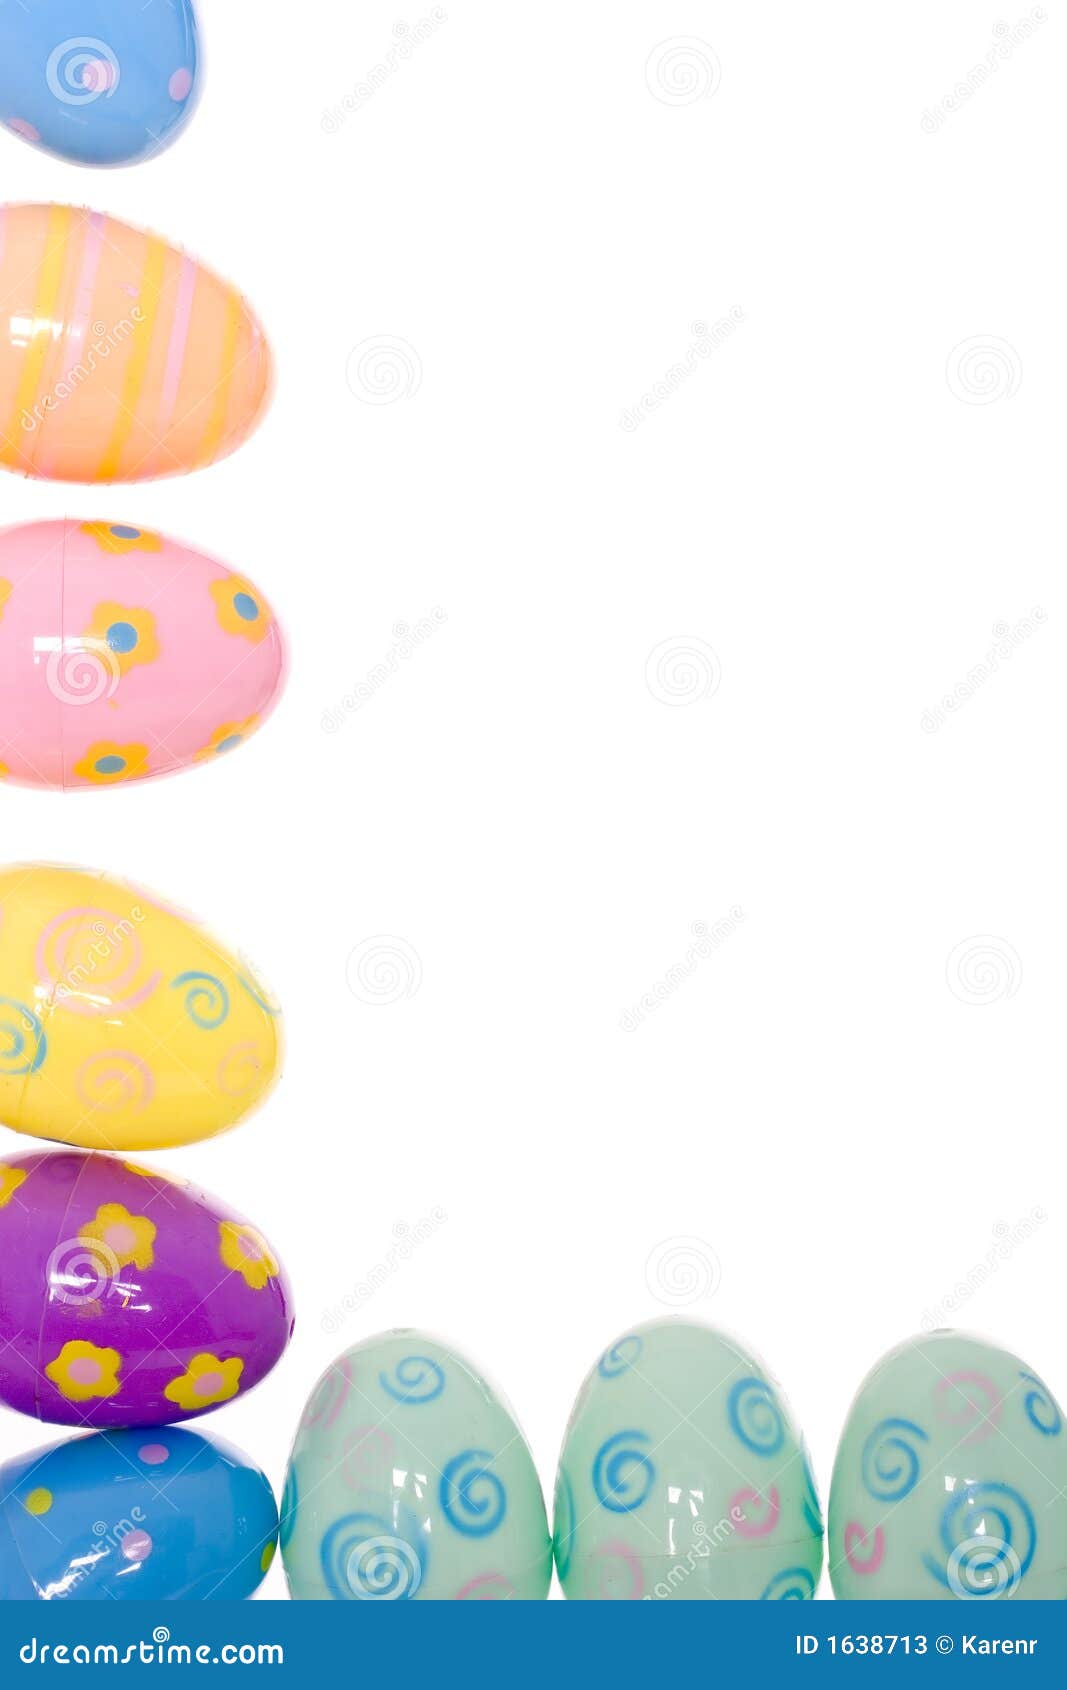 Colorful Easter Egg Background Stock Photos - Image: 1638713